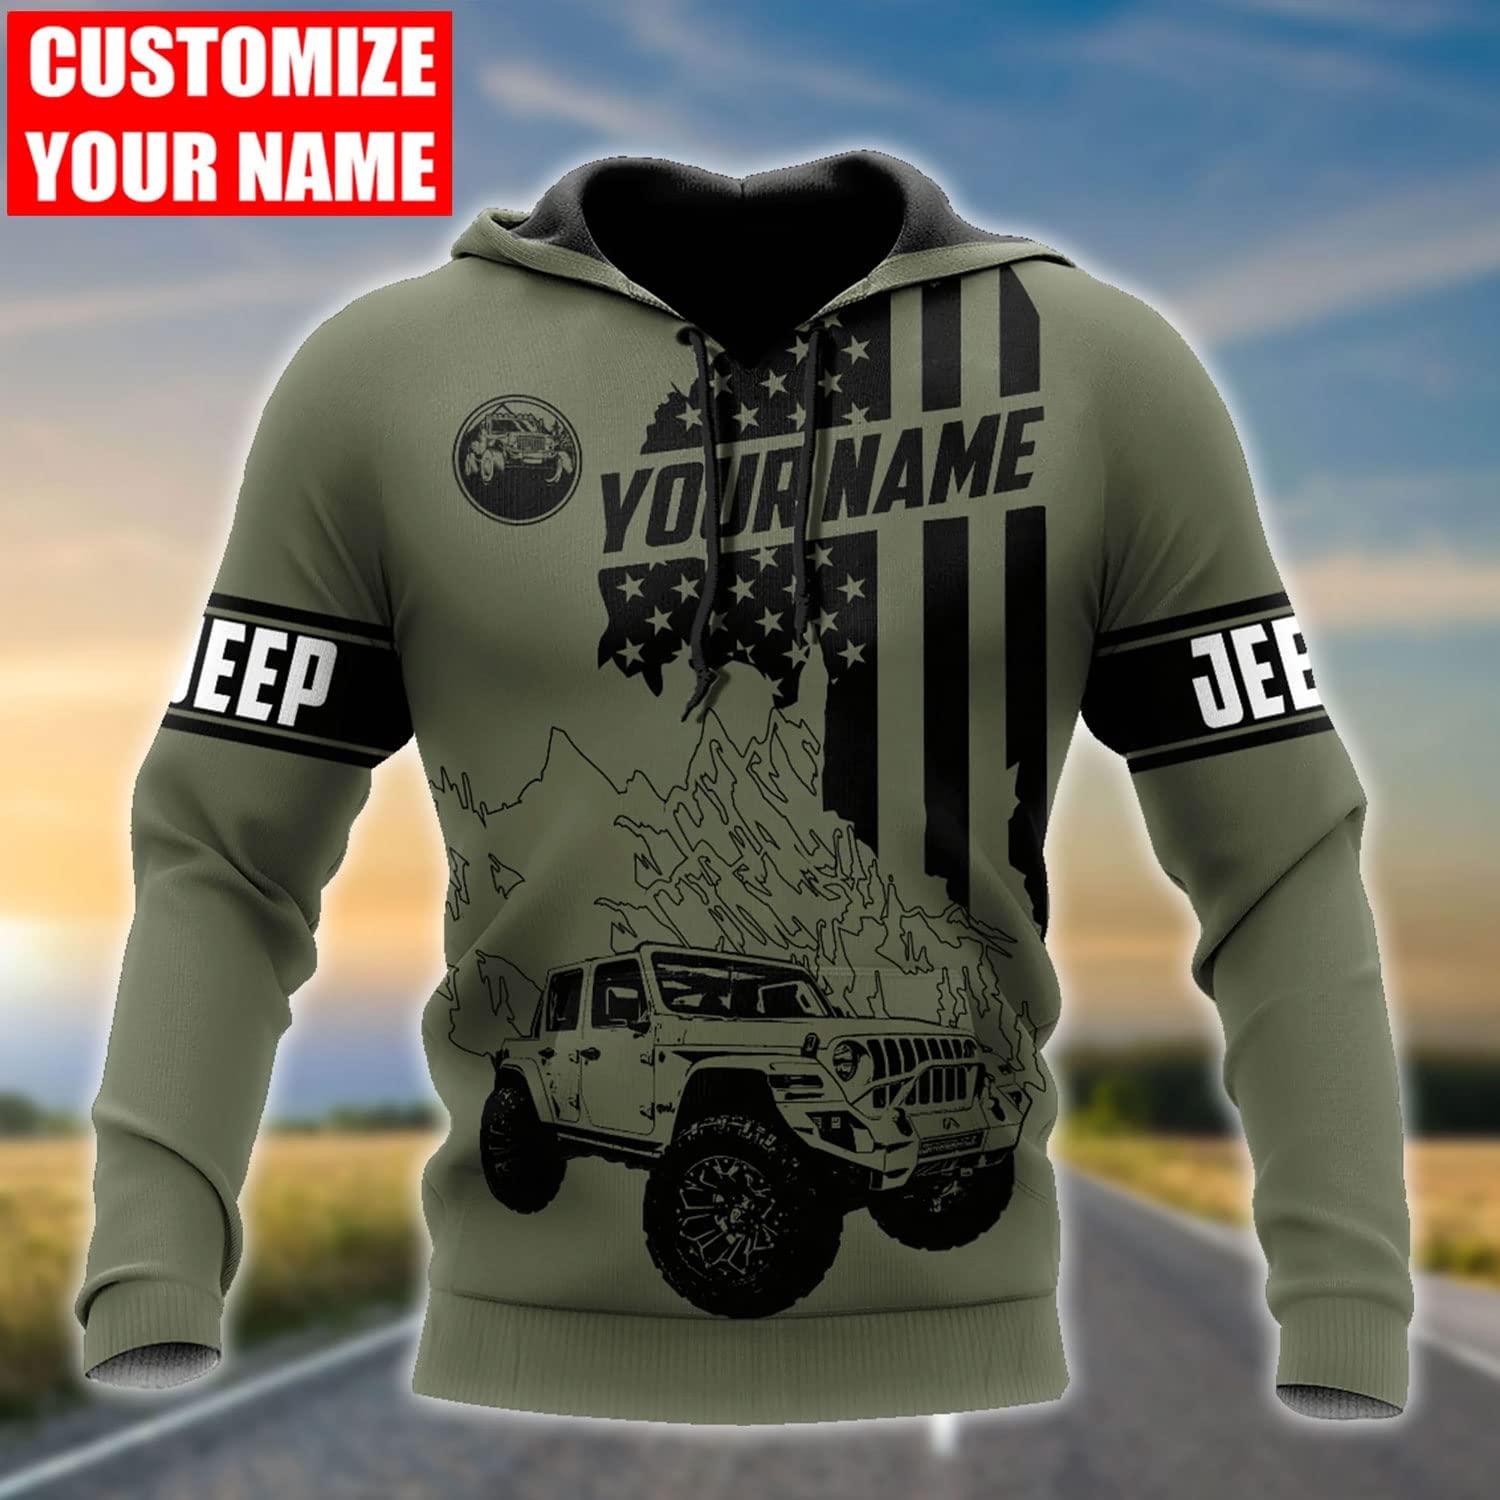 personalized 3d printed shirts the perfect gift for 3d print enthusiasts featuring hawaiian shirts sweatshirts hoodies zip hoodies and multicolor over printing. jot1387 h4zxa